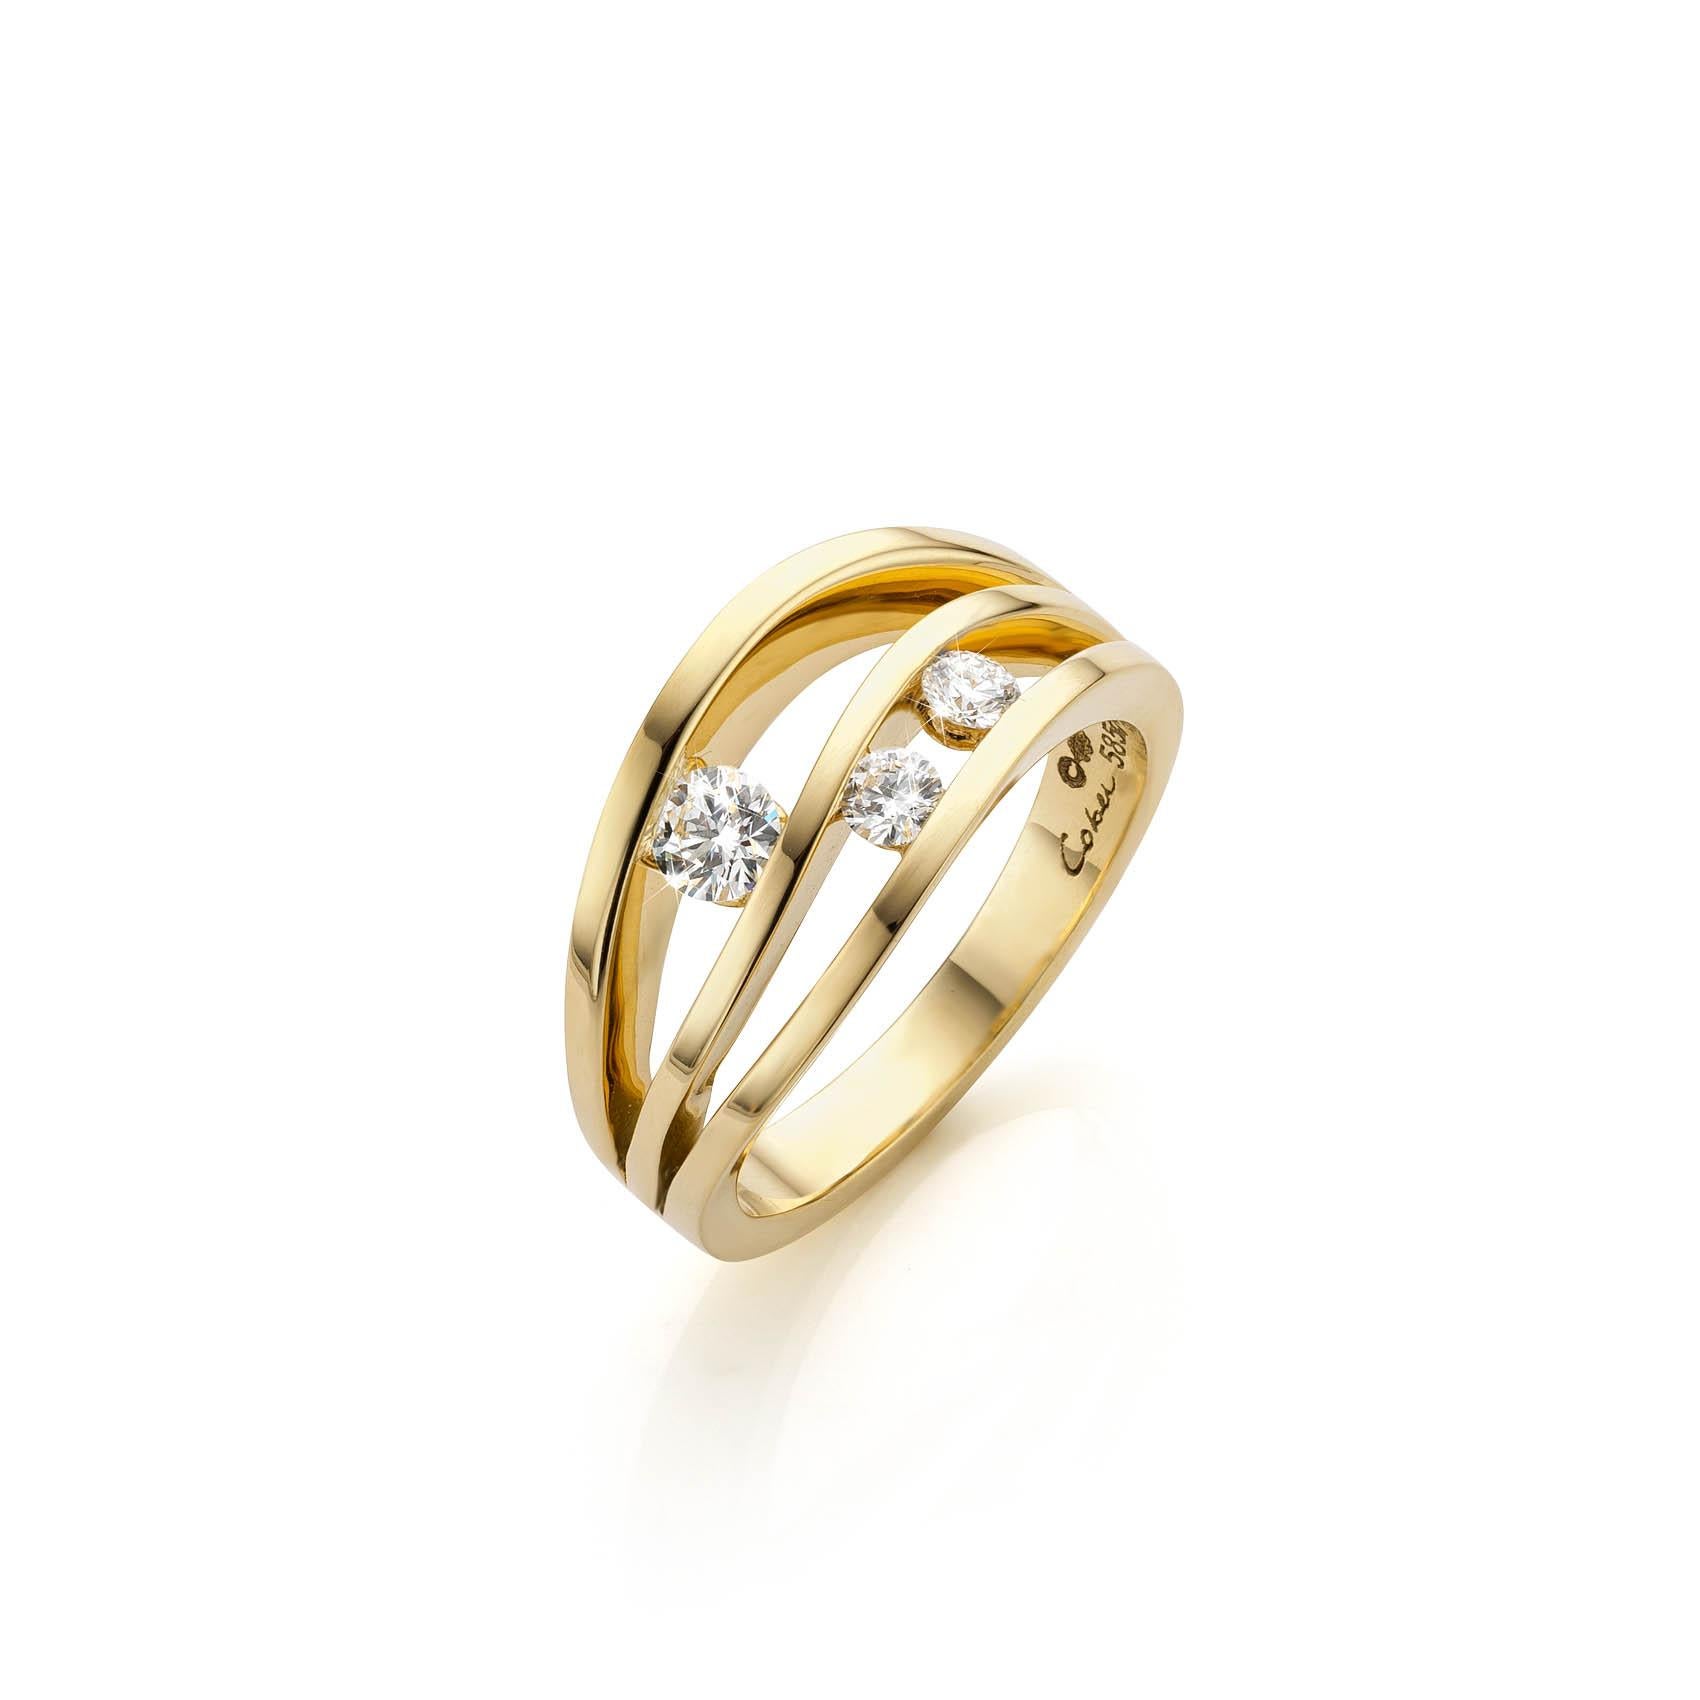 This is a 14 Carat Yellow gold ring with 3 Brilliant-cut Diamonds. This ring is available in different design. We have also one design in White gold.
Cober designs exclusive wedding rings, jewels and watches, all of them made by hand.
“The most